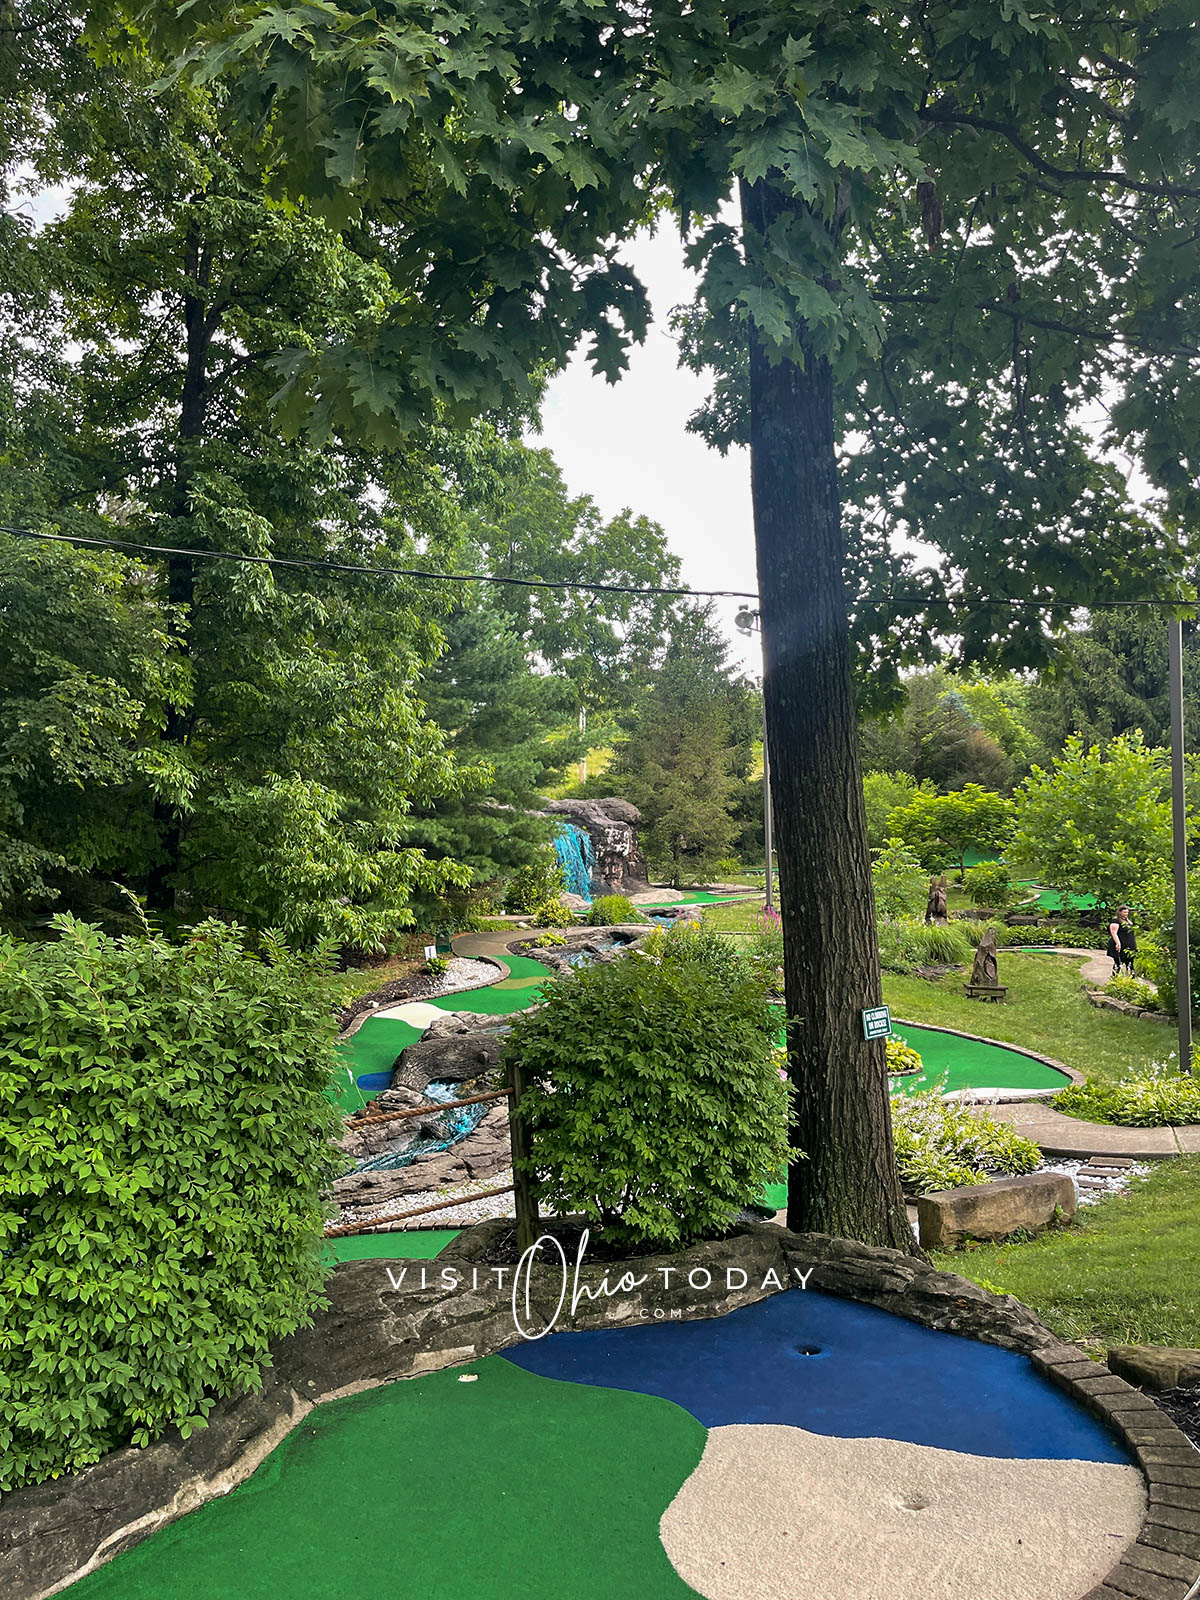 vertical photo of an area of Adventure Golf at Rempel's Grove with trees and foliage all around it Photo credit: Cindy Gordon of VisitOhioToday.com